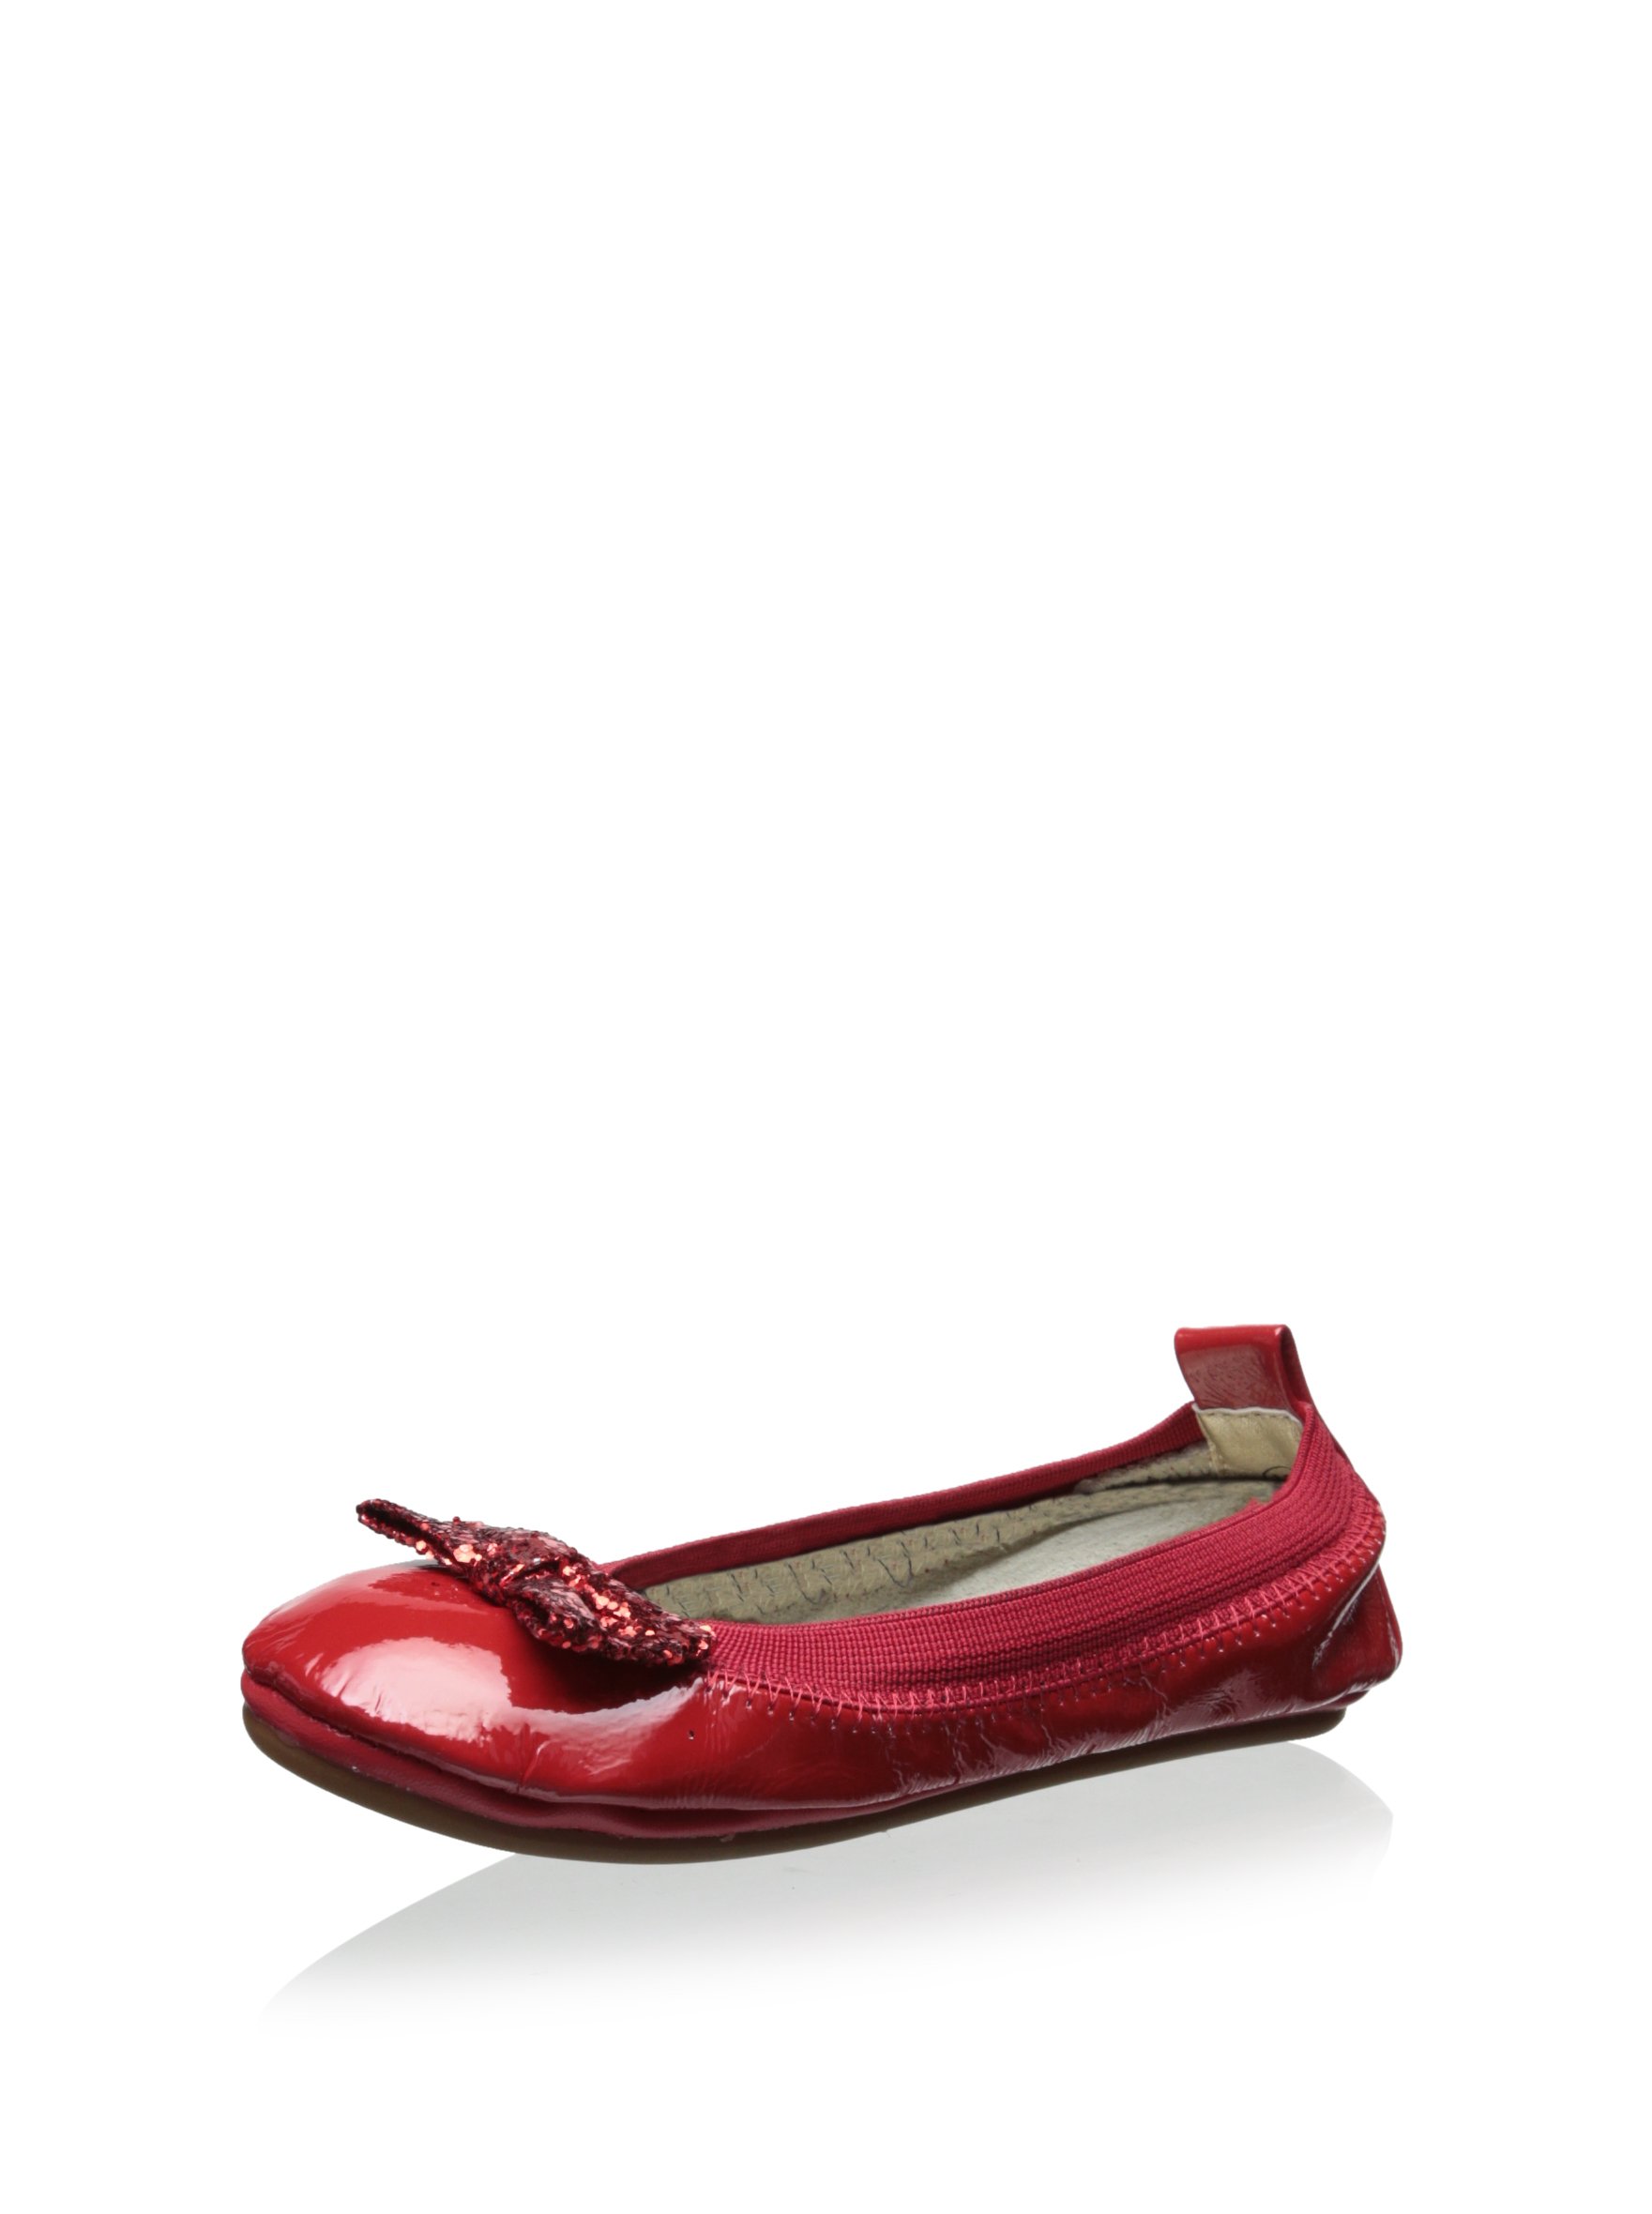 Yosi Samra Patent Leather Bendable Ballet Flat with Red Chunky Glitter Bow 8C - image 1 of 2